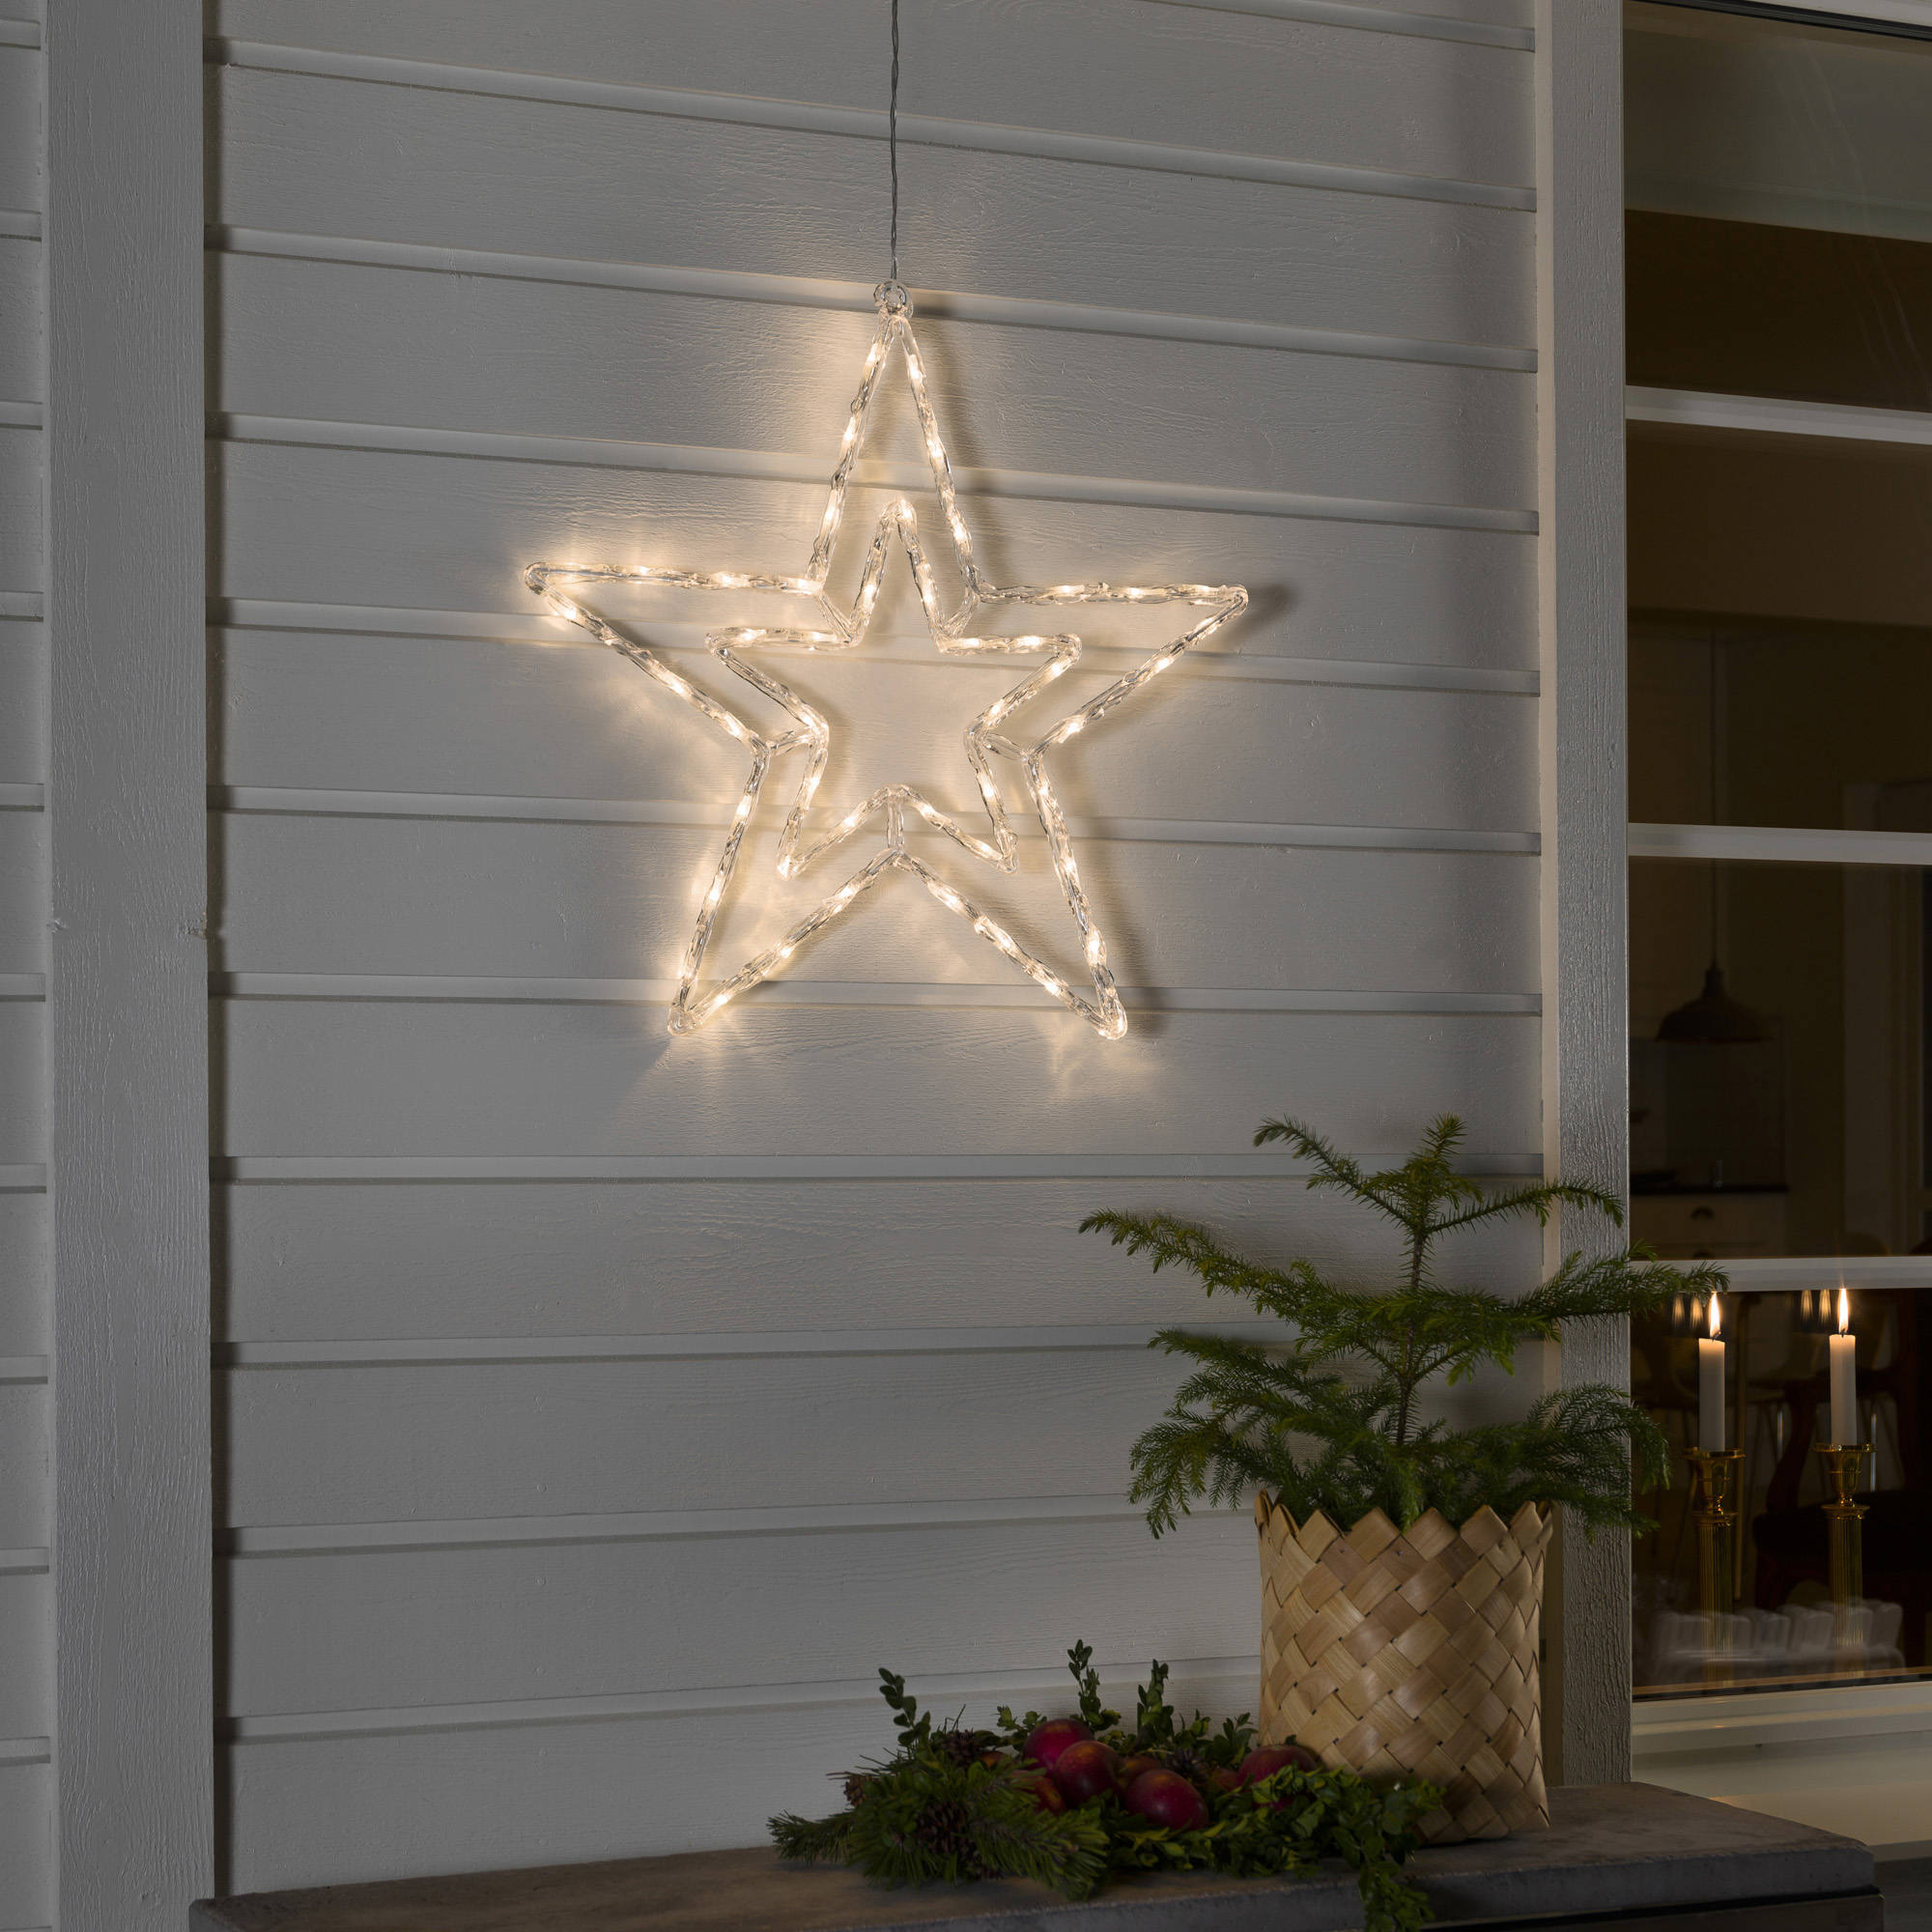 LED Acrylic Star warm white, 48 LEDs, with 8 Functions